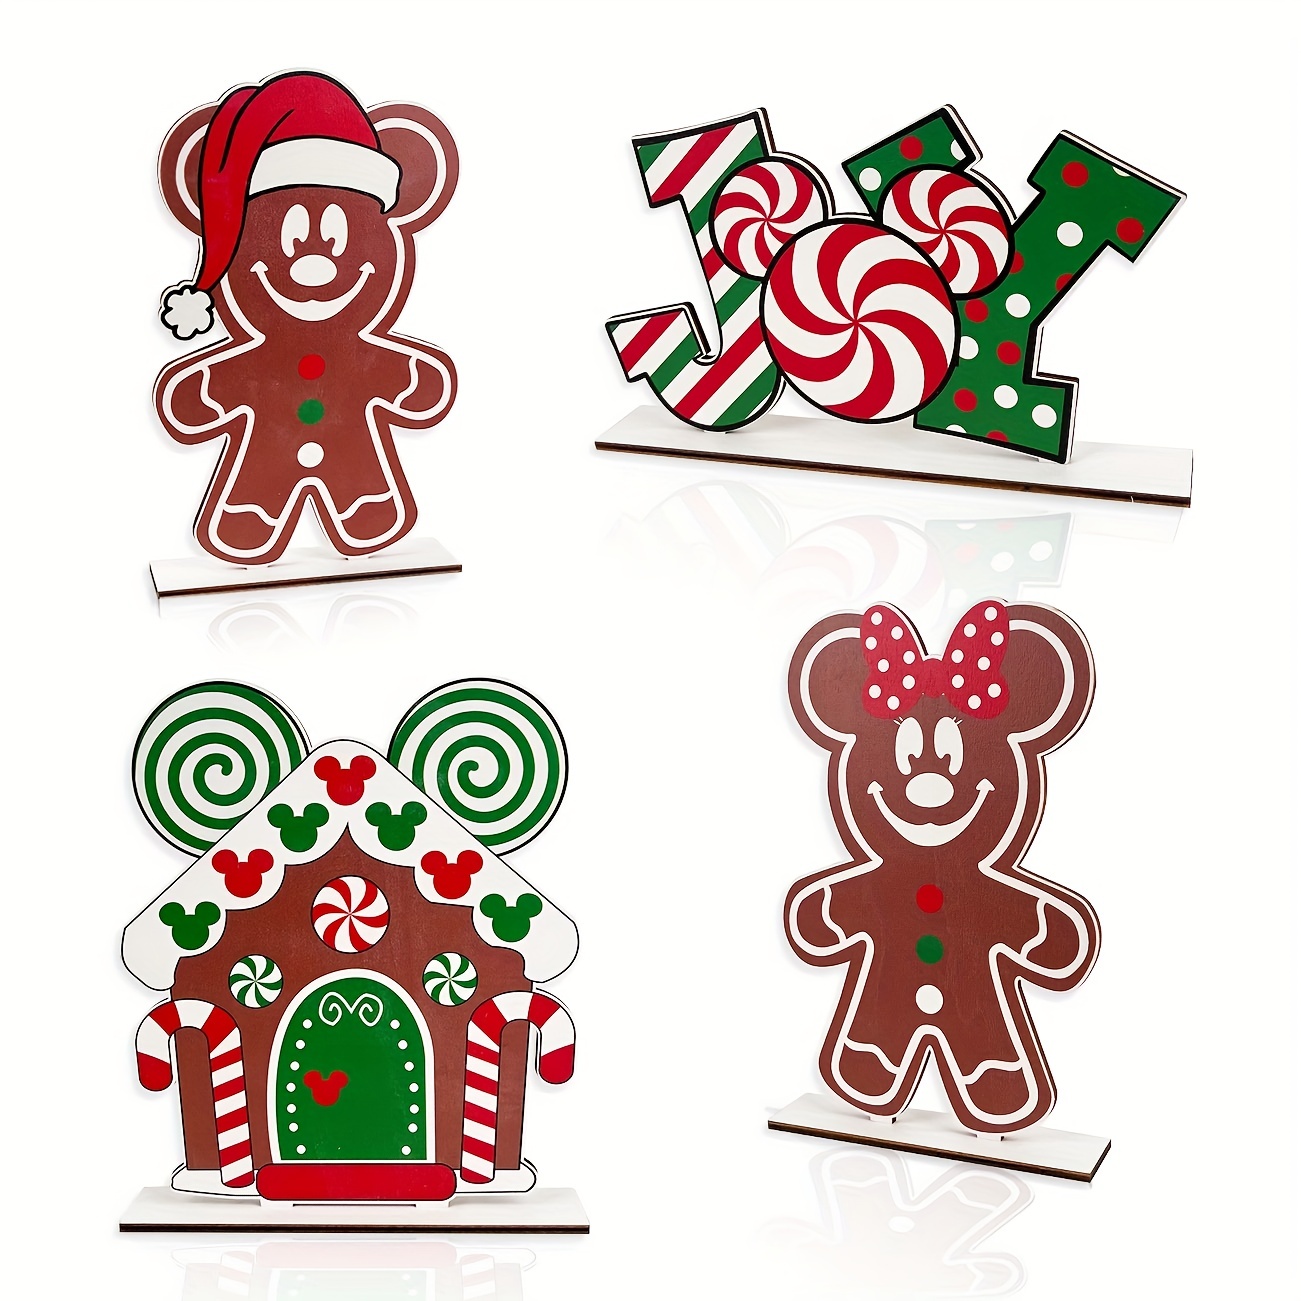 I love gingerbread! I can't believe how much Christmas stuff is alread